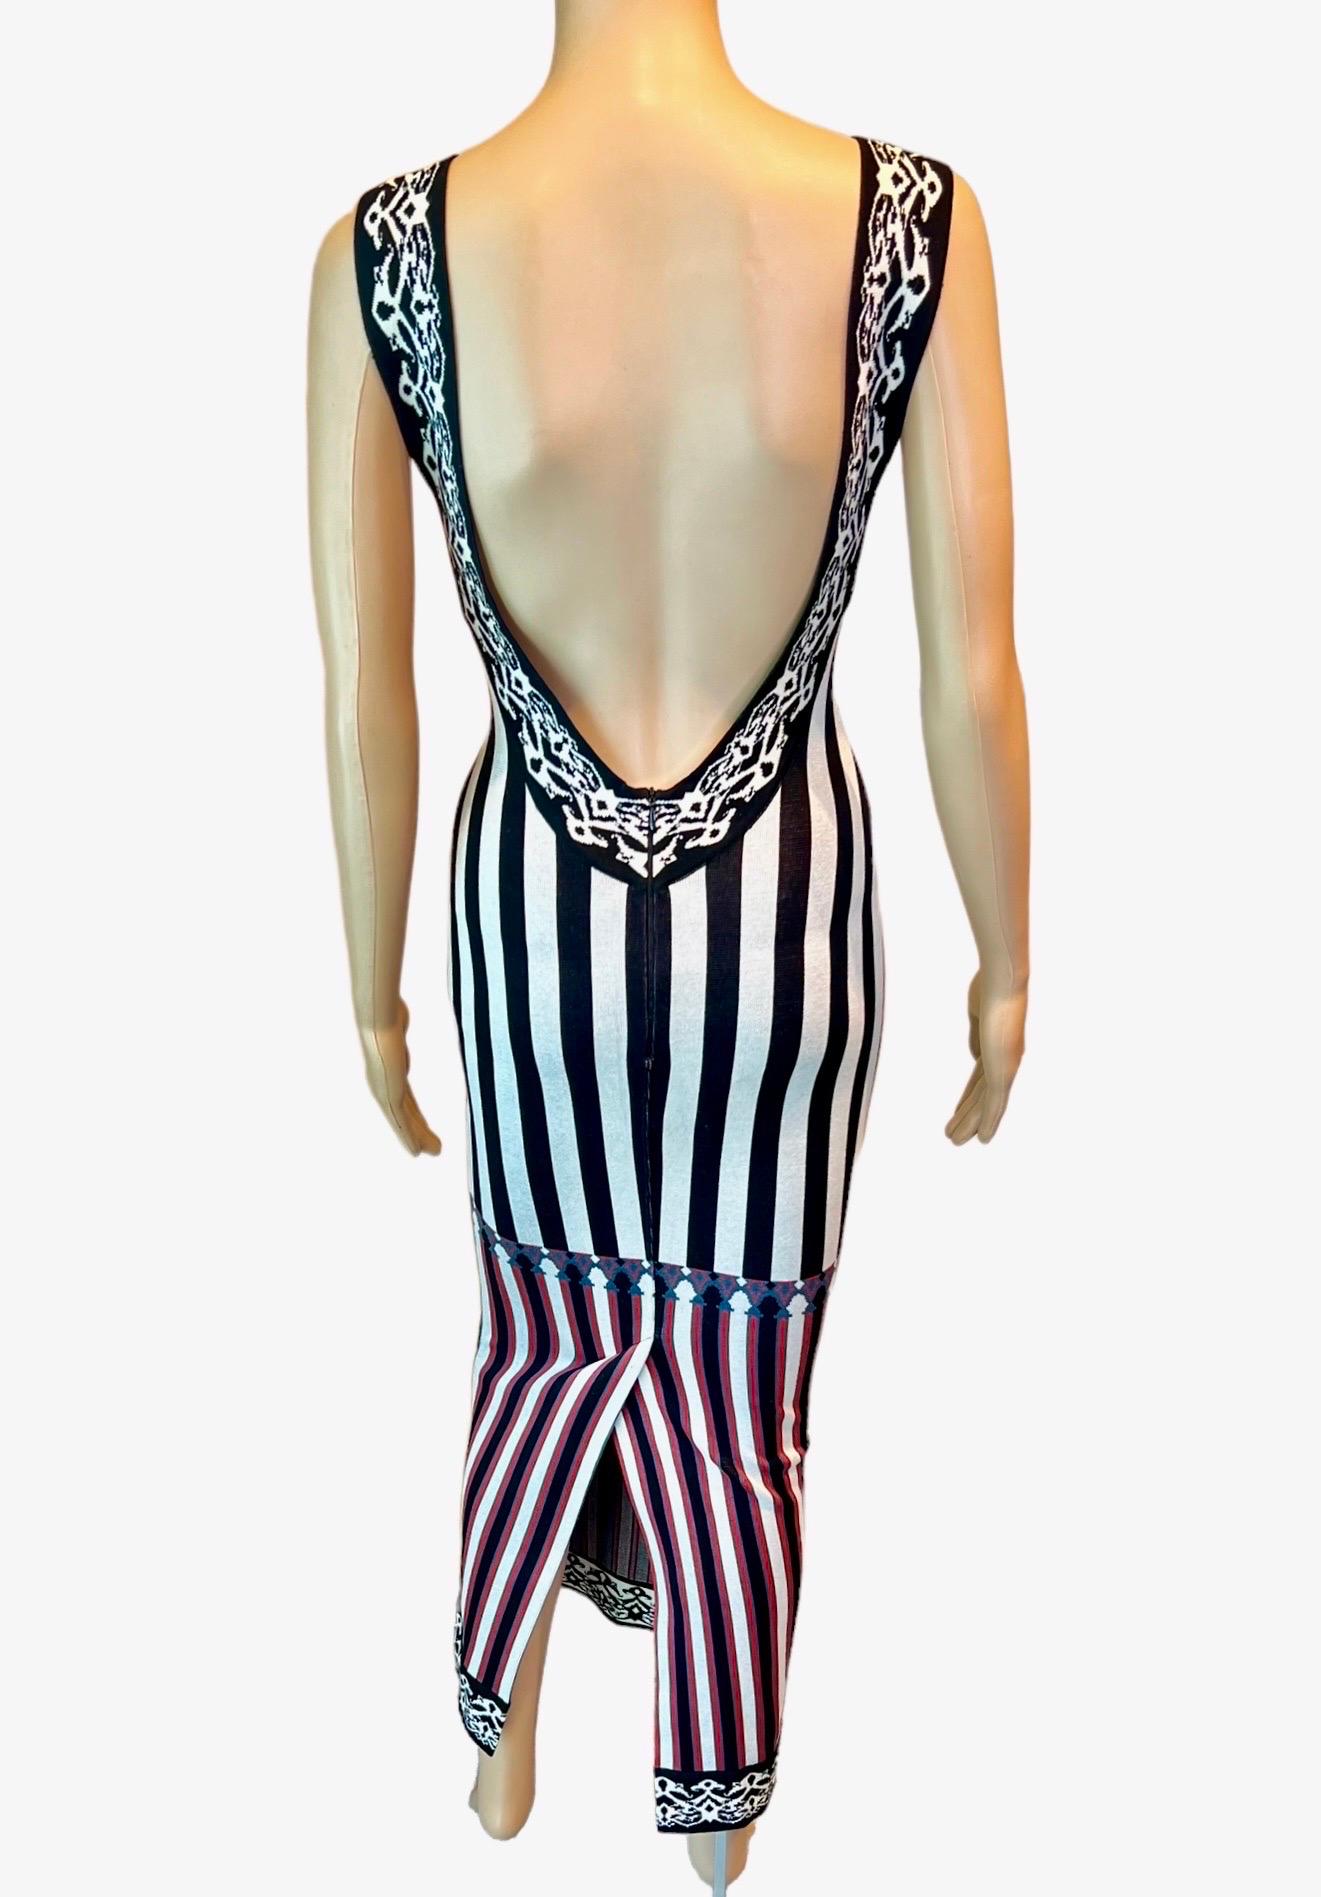 Azzedine Alaia S/S 1992 Runway Vintage Striped Bodycon Backless Maxi Dress For Sale 1